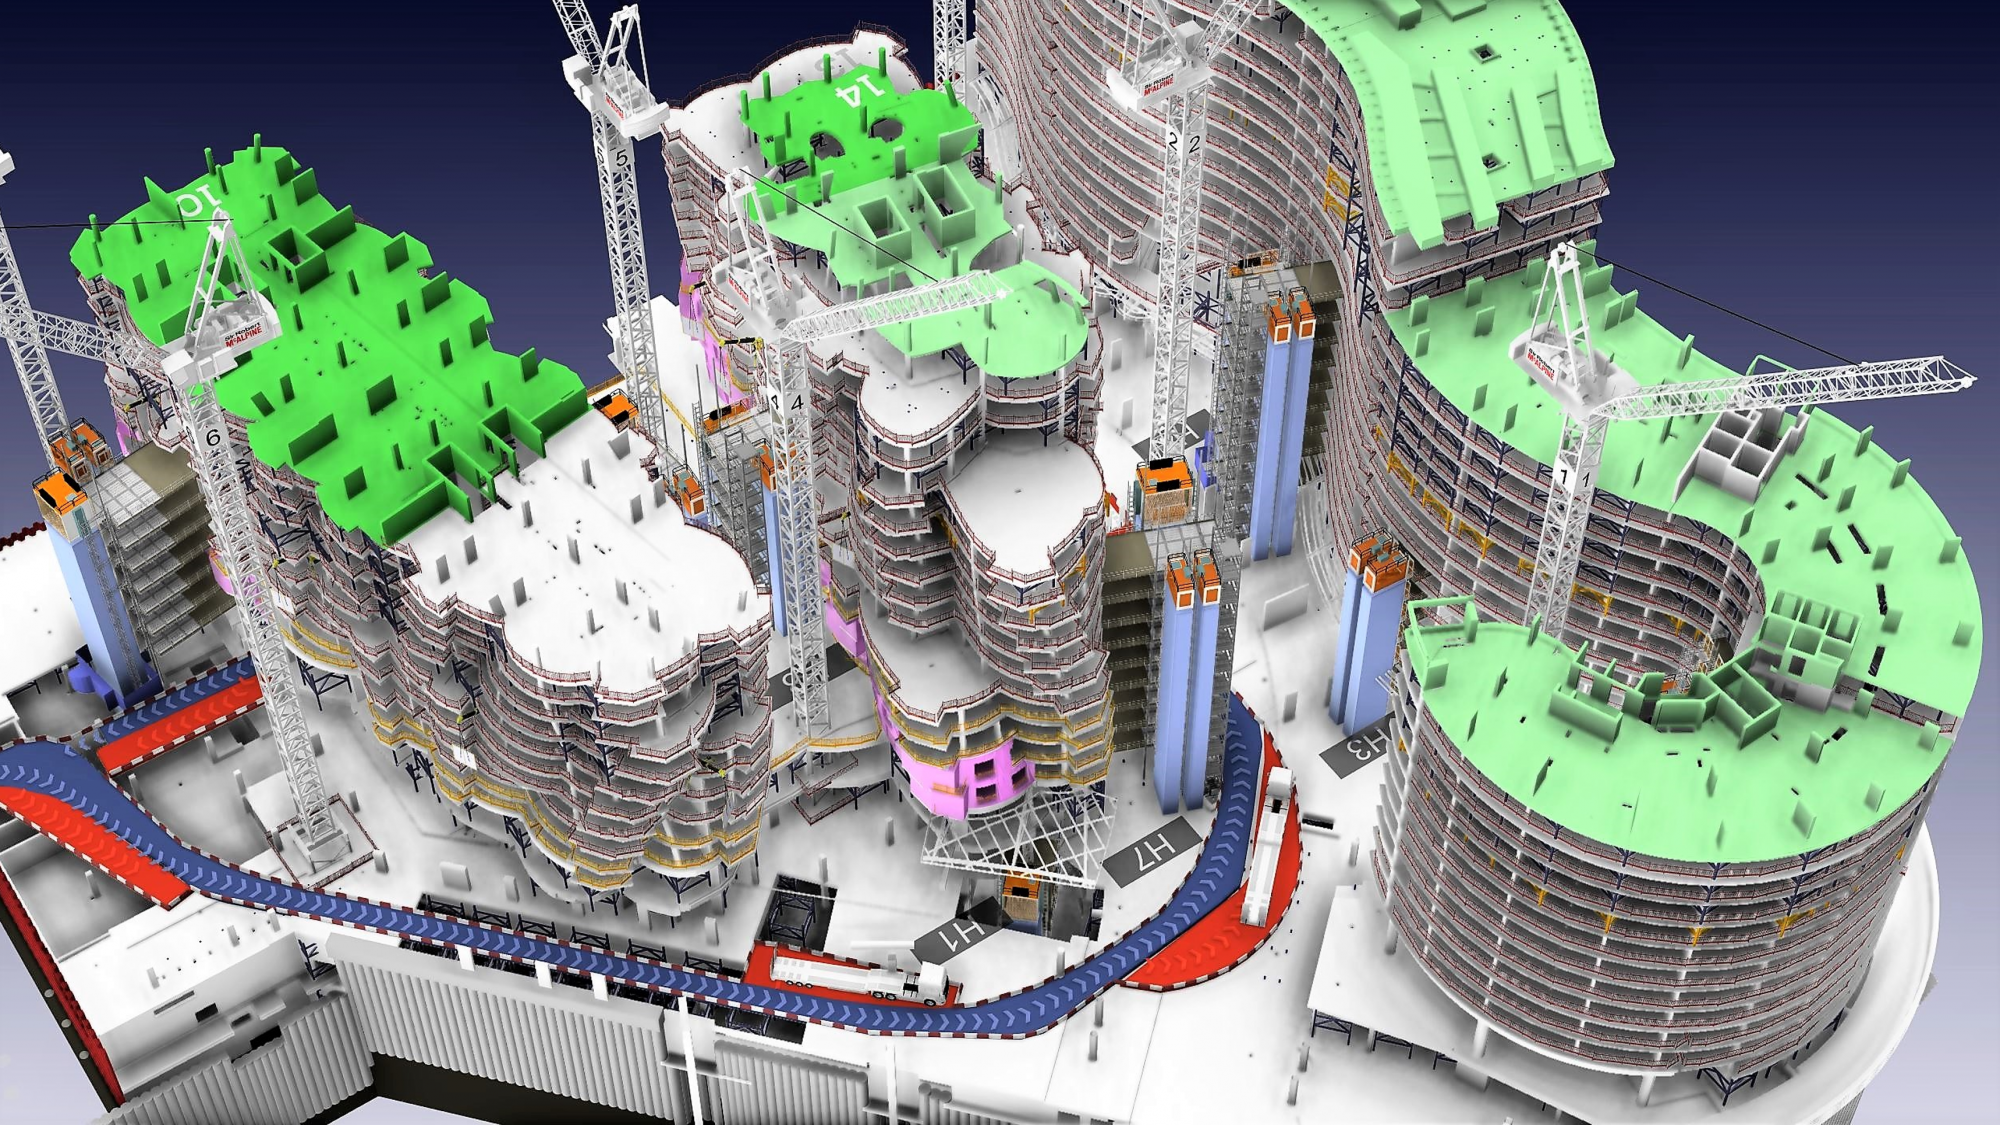 4D BIM: What is it and how can it benefit your project?